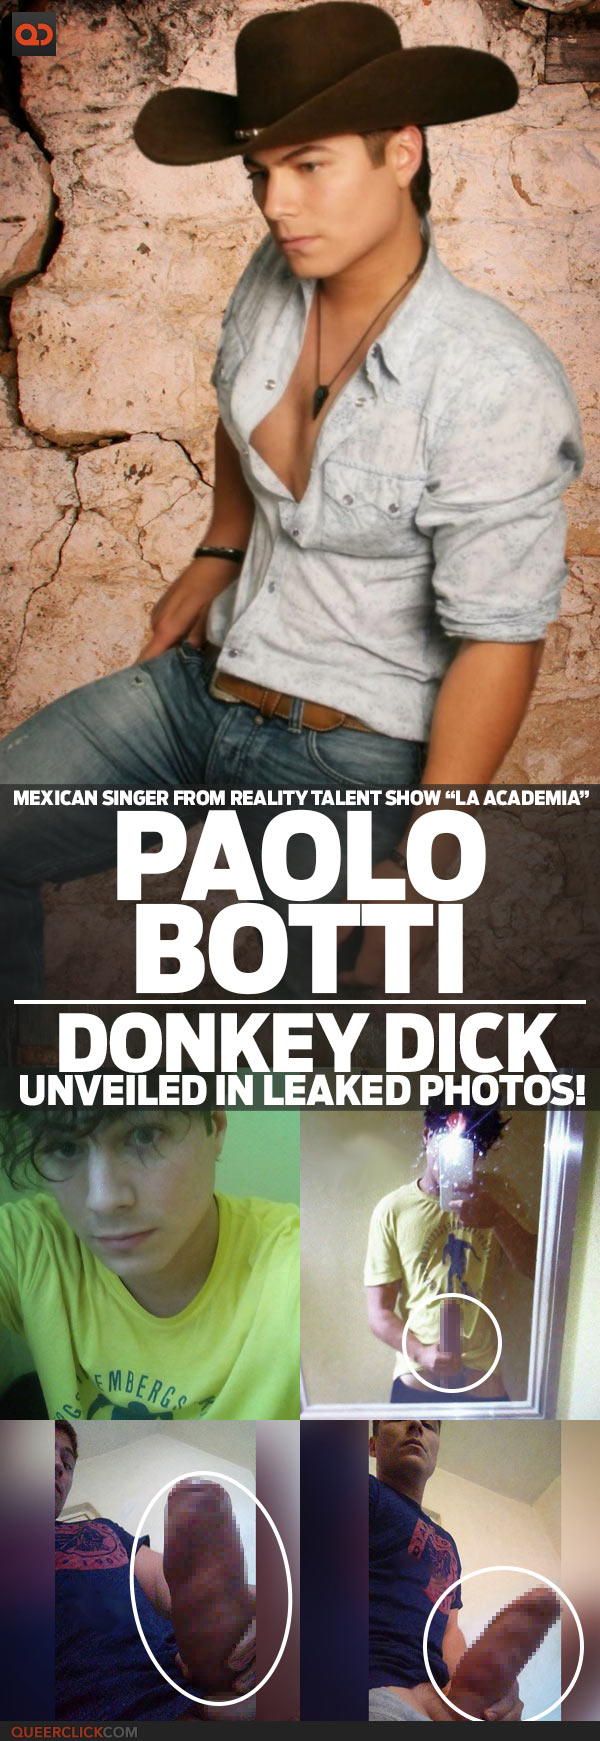 Paolo Botti, Mexican Singer From Reality Talent Show “La Academia”, Donkey Dick Unveiled In Leaked Photos!